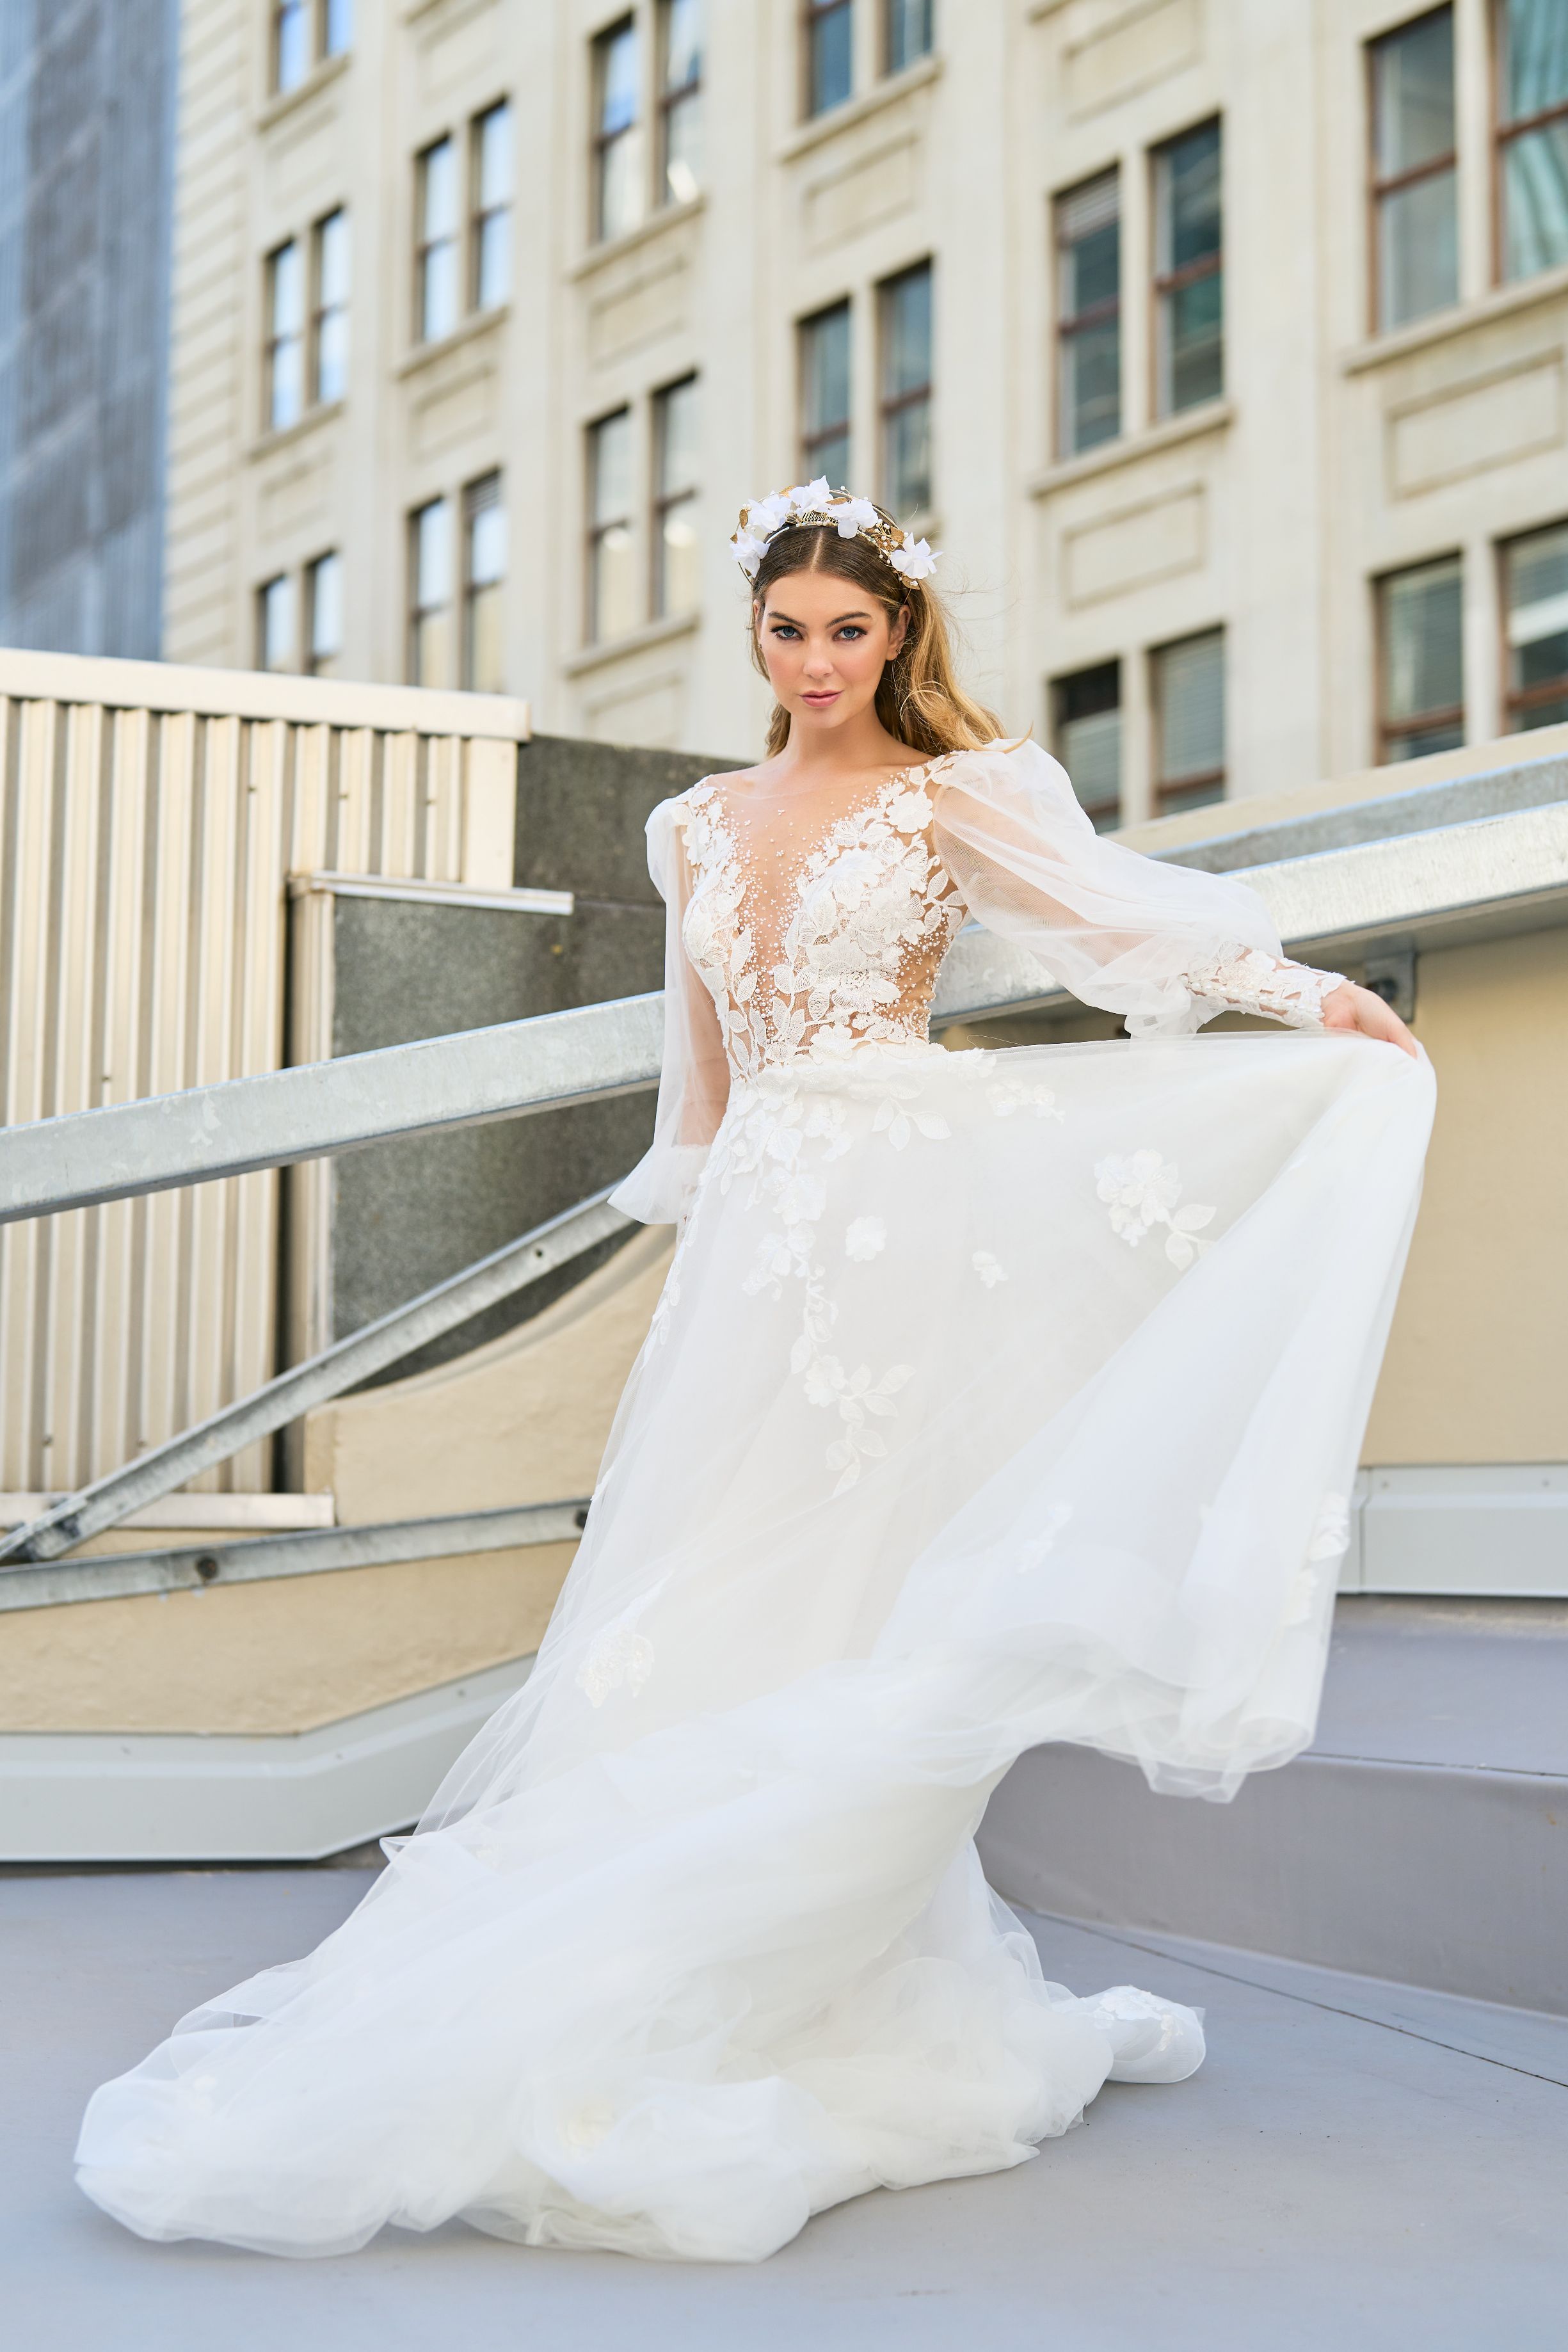 Rubi wedding dress with floral detailing on décolletage and skirt. Sheer sleeves add a delicate touch. Plunging v-neckline and A-line silhouette create an elegant and romantic look that makes you appear to be floating down the aisle.